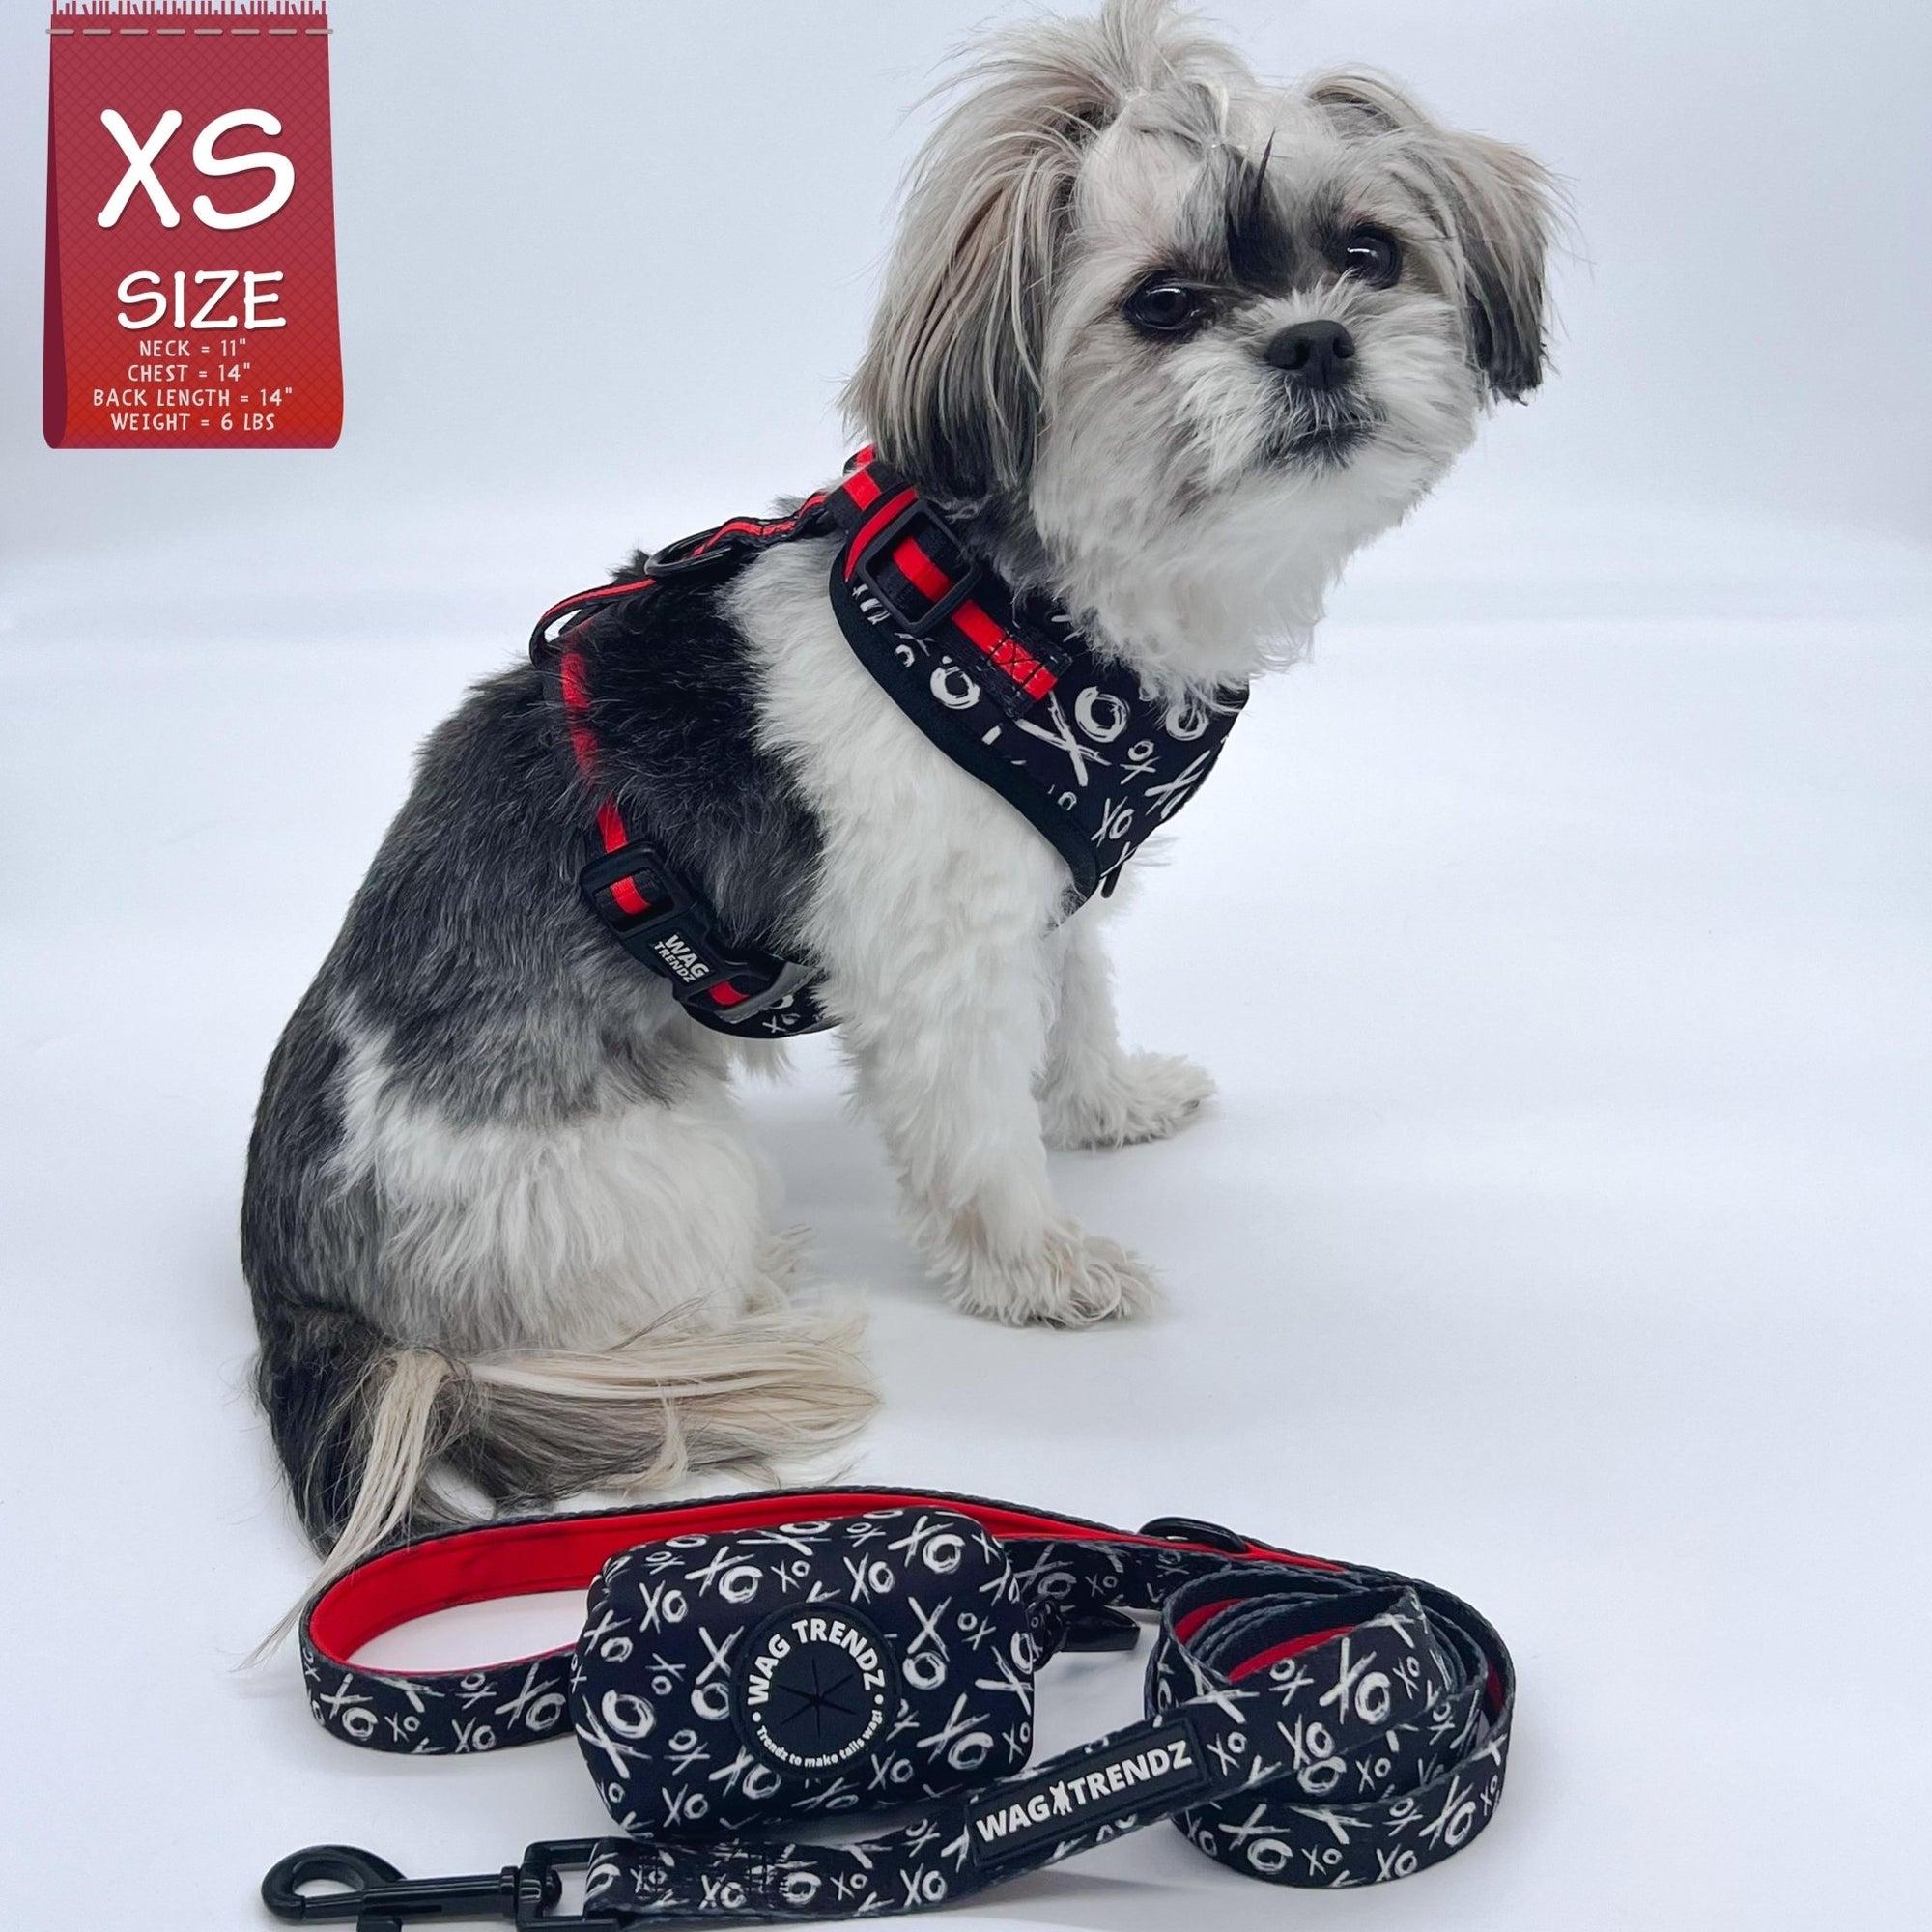 Dog Leash and Harness Set - Shih Tzu wearing XS Dog Harness Vest in  black and white XO&#39;s with bold red accents and matching dog leash and poop bag holder - against solid white background - Wag Trendz